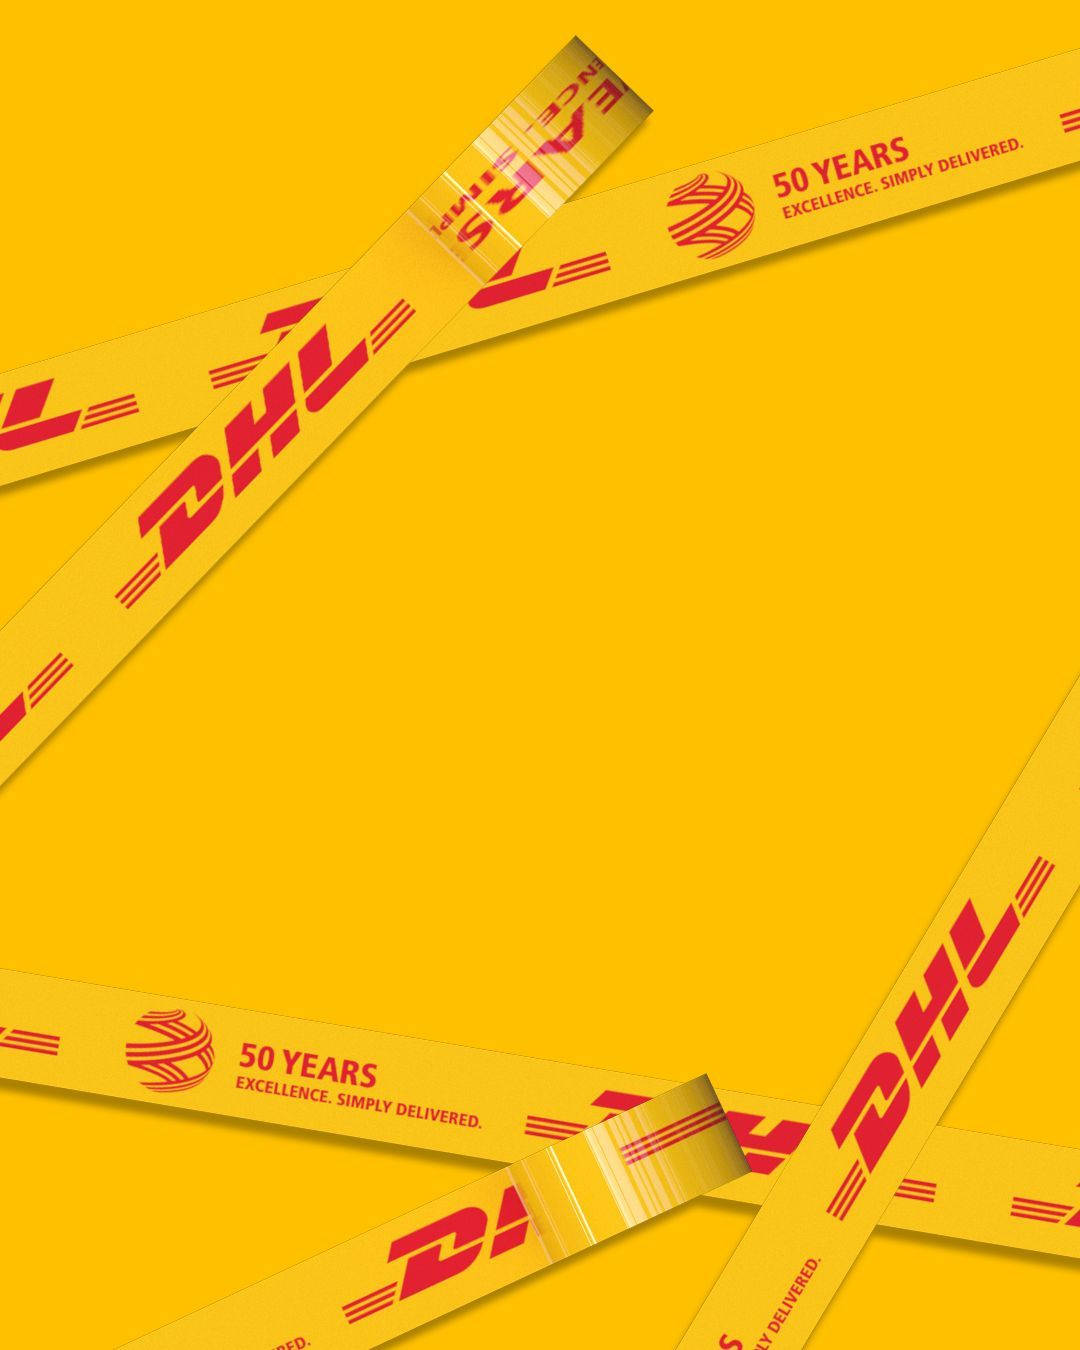 Dhl Duct Tapes Wallpaper